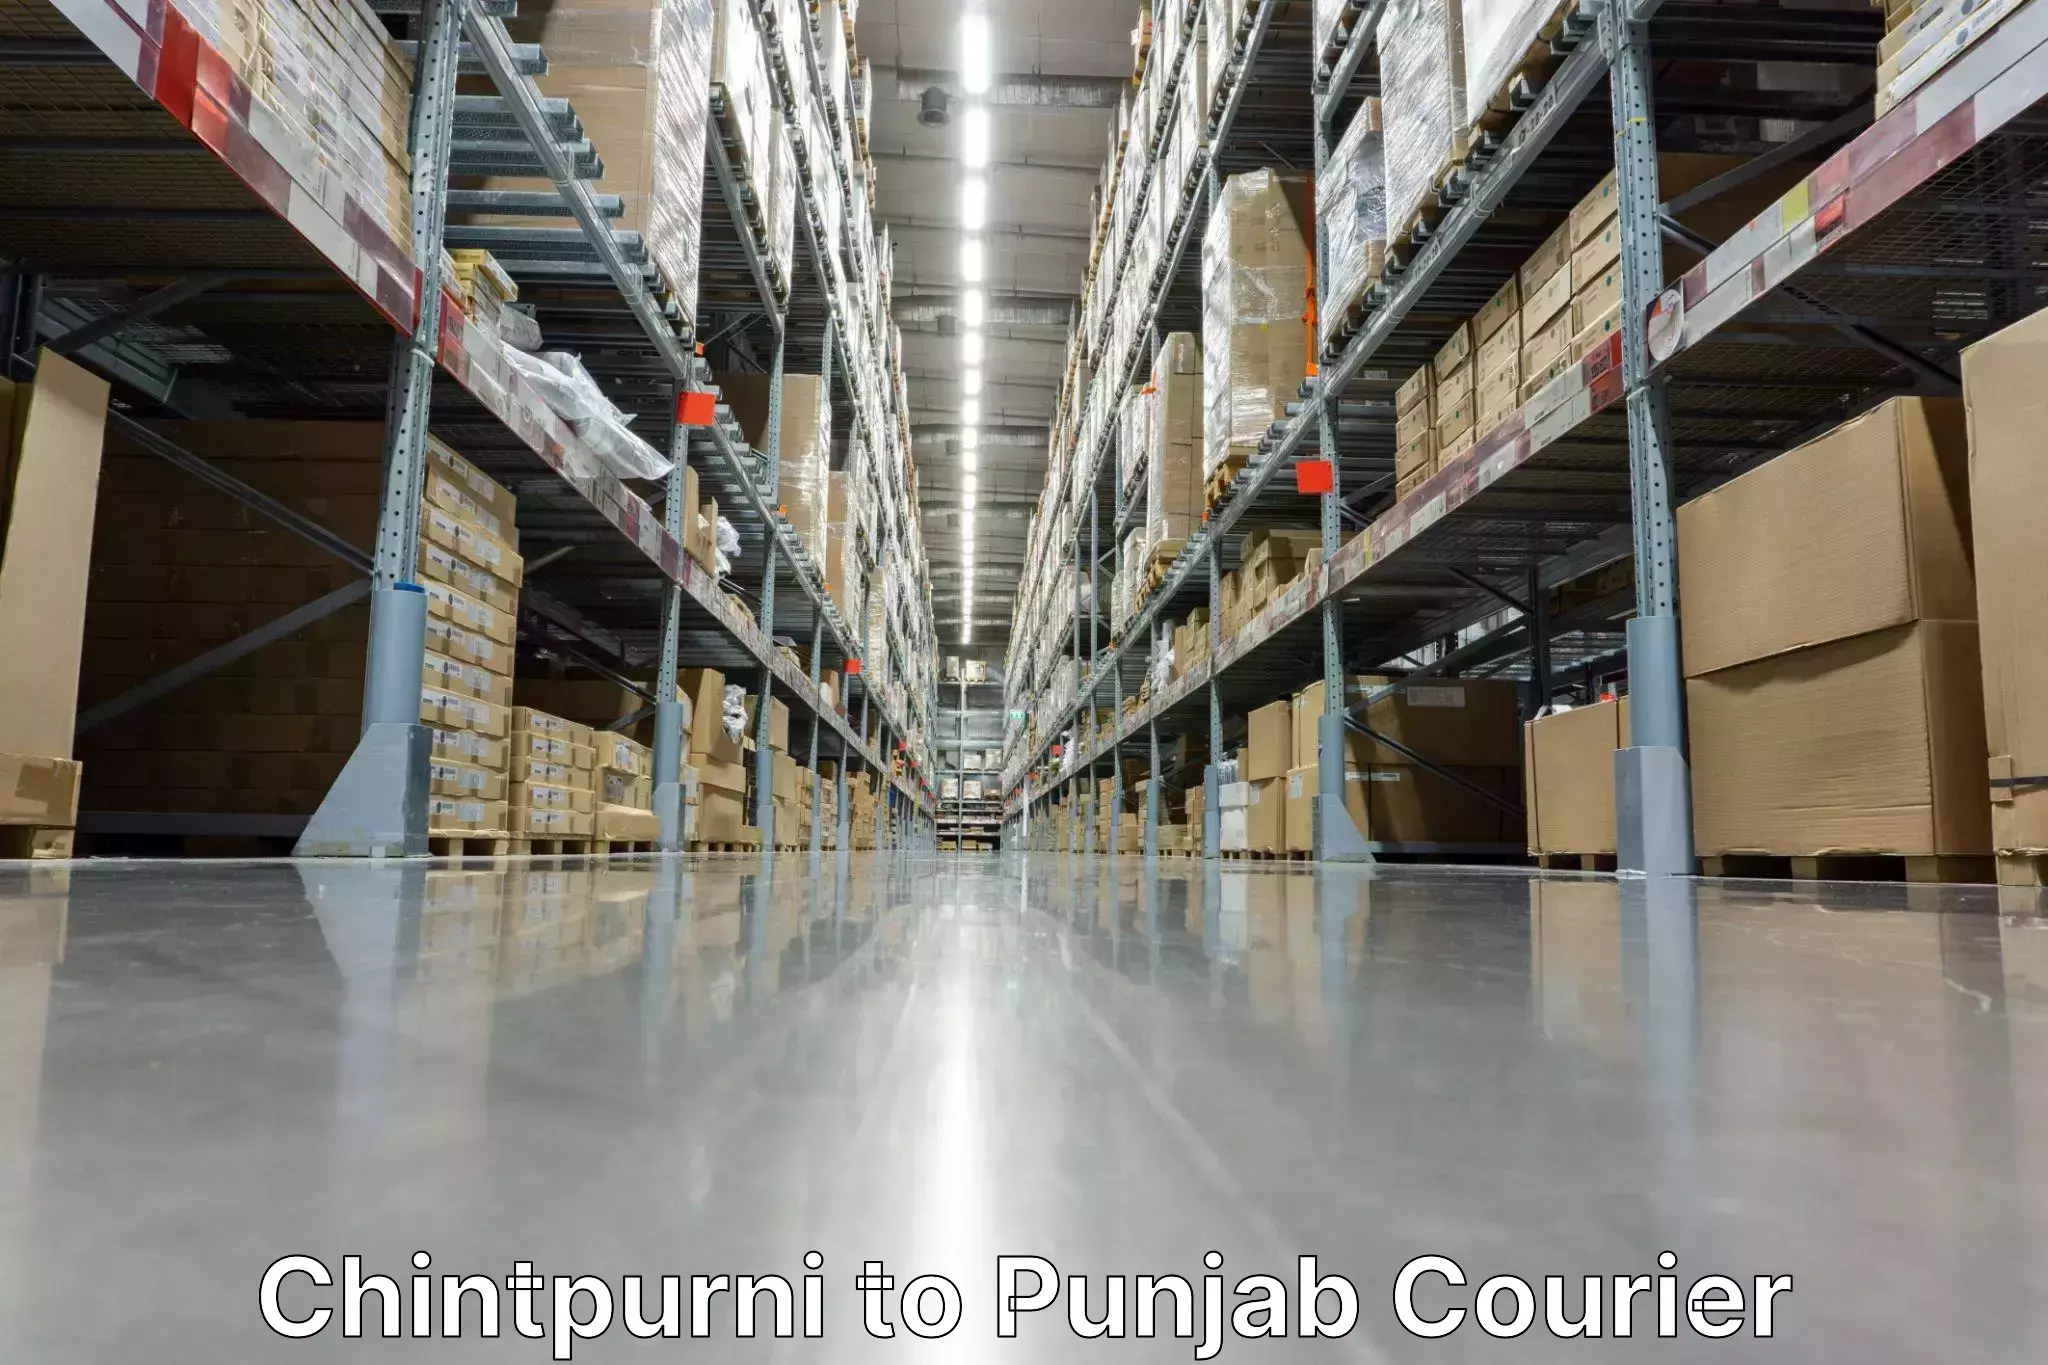 Professional parcel services in Chintpurni to Punjab